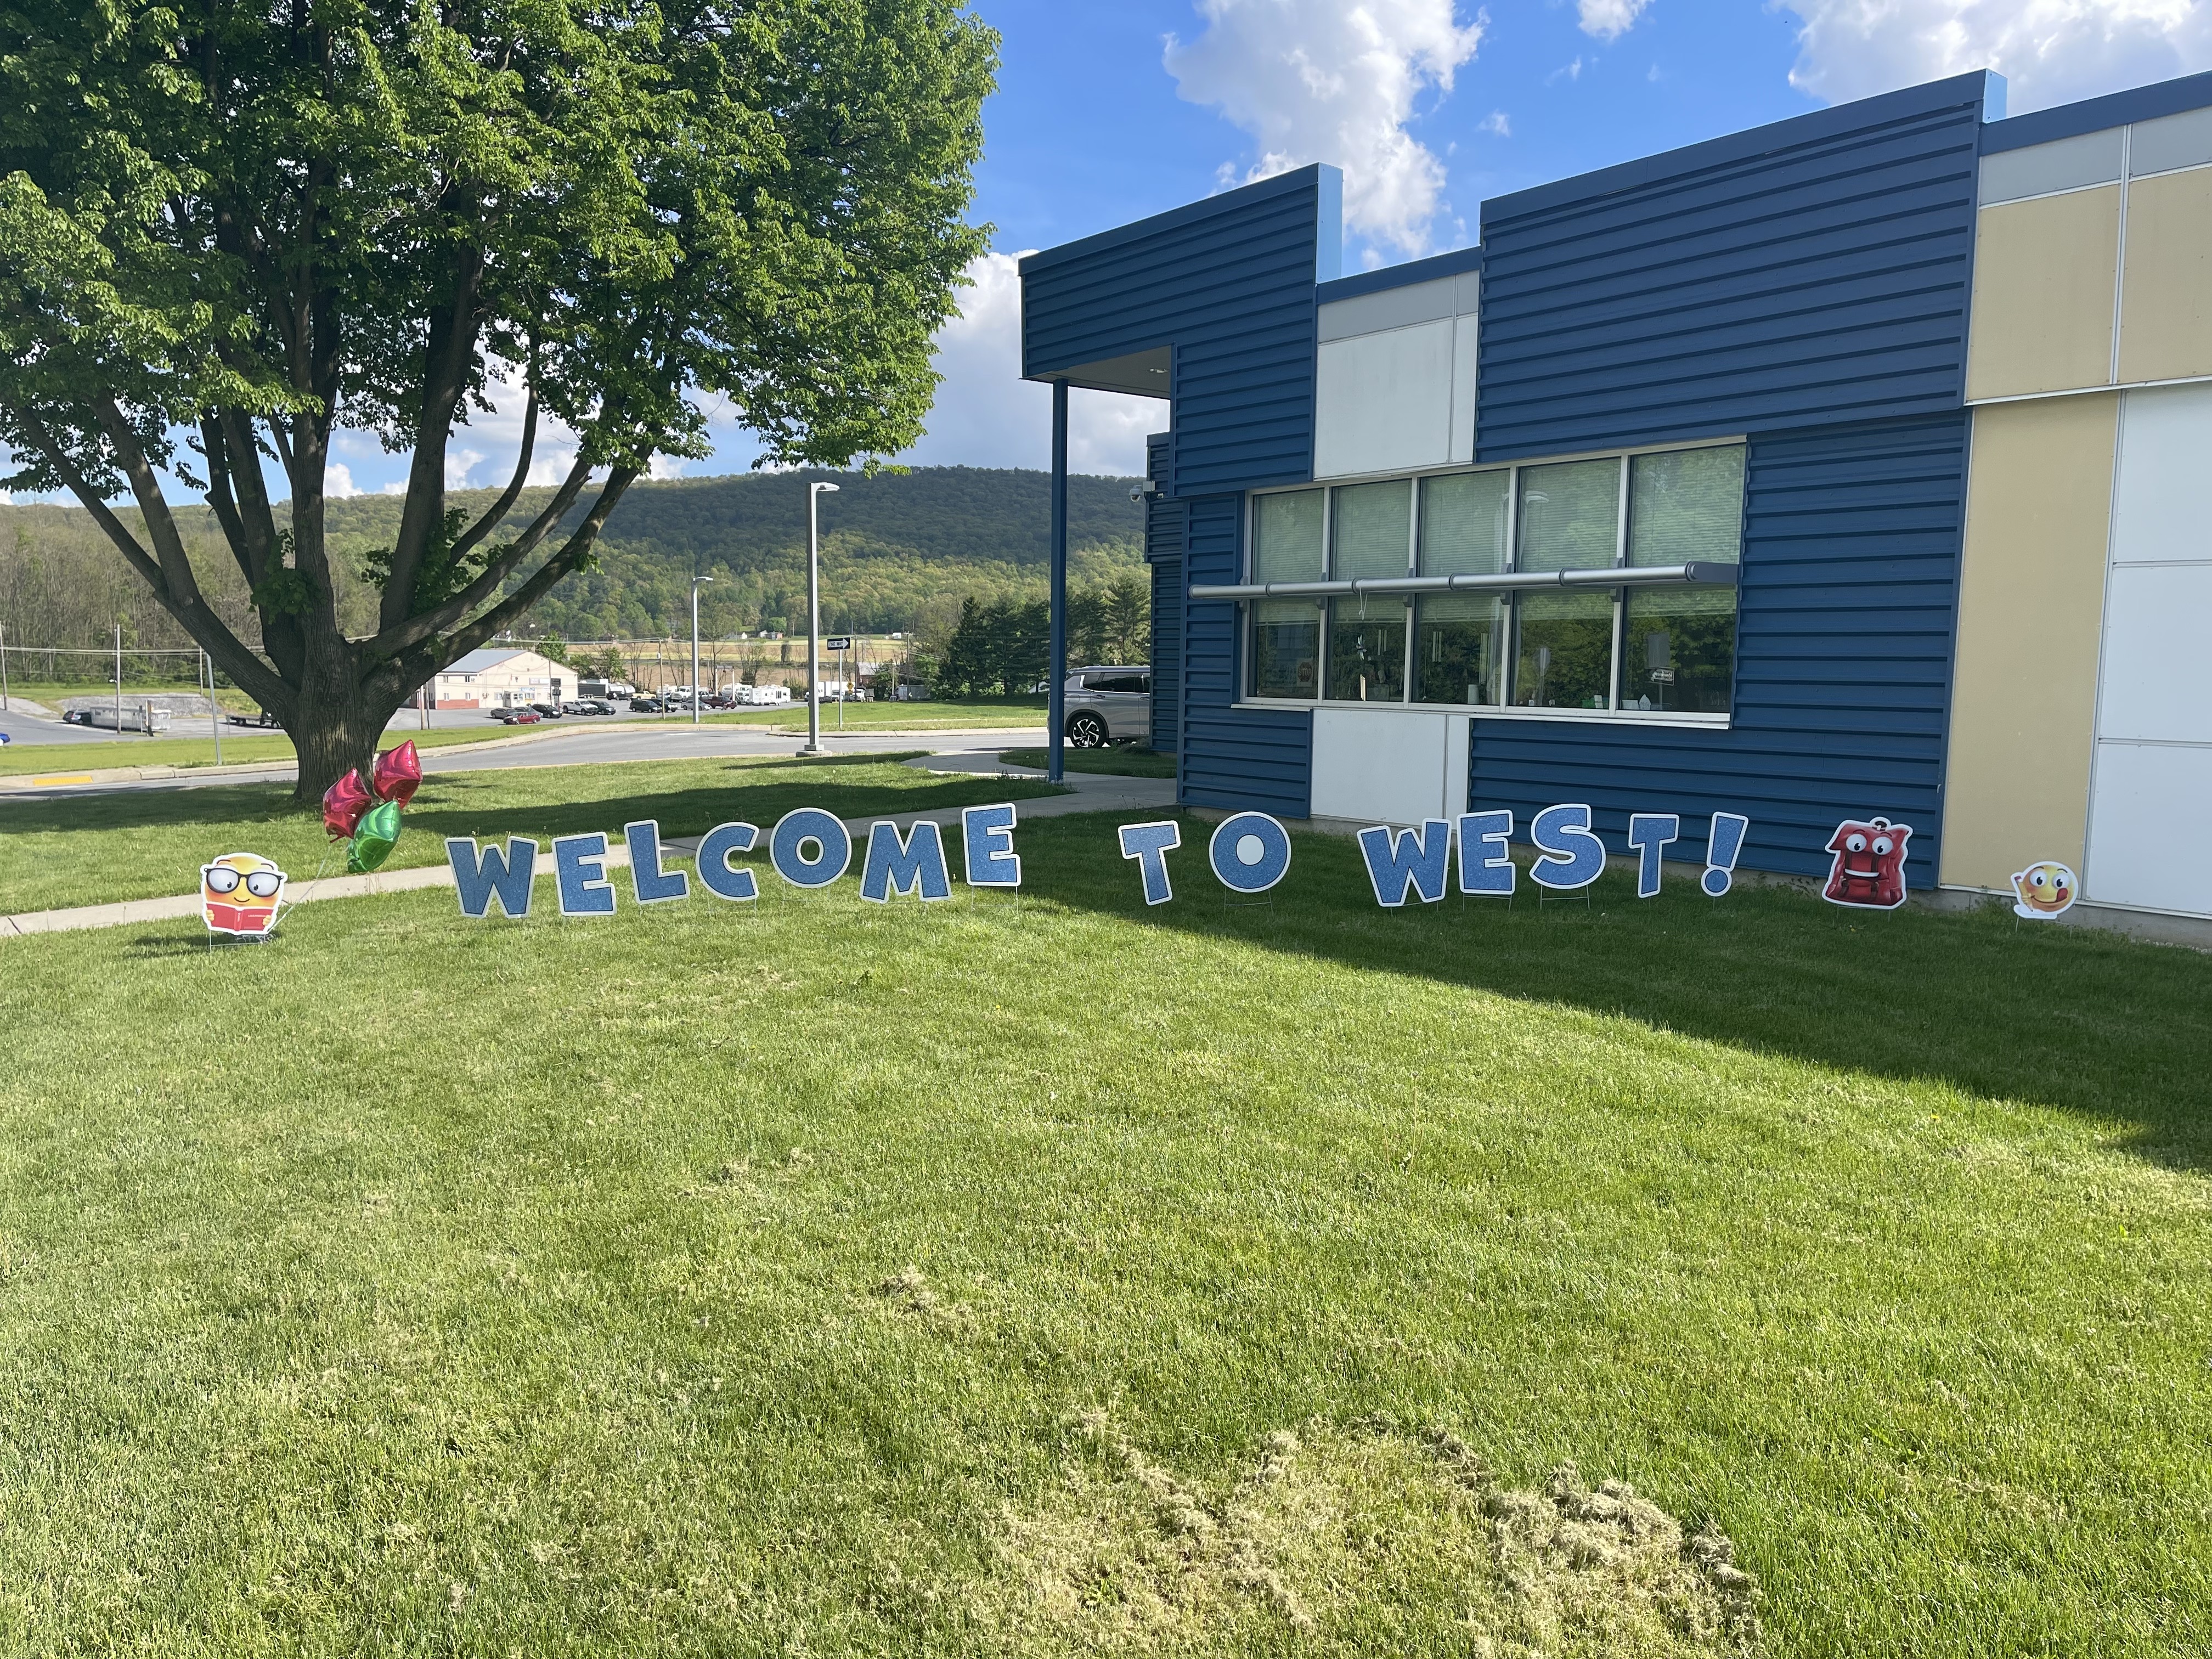 Welcome to West!